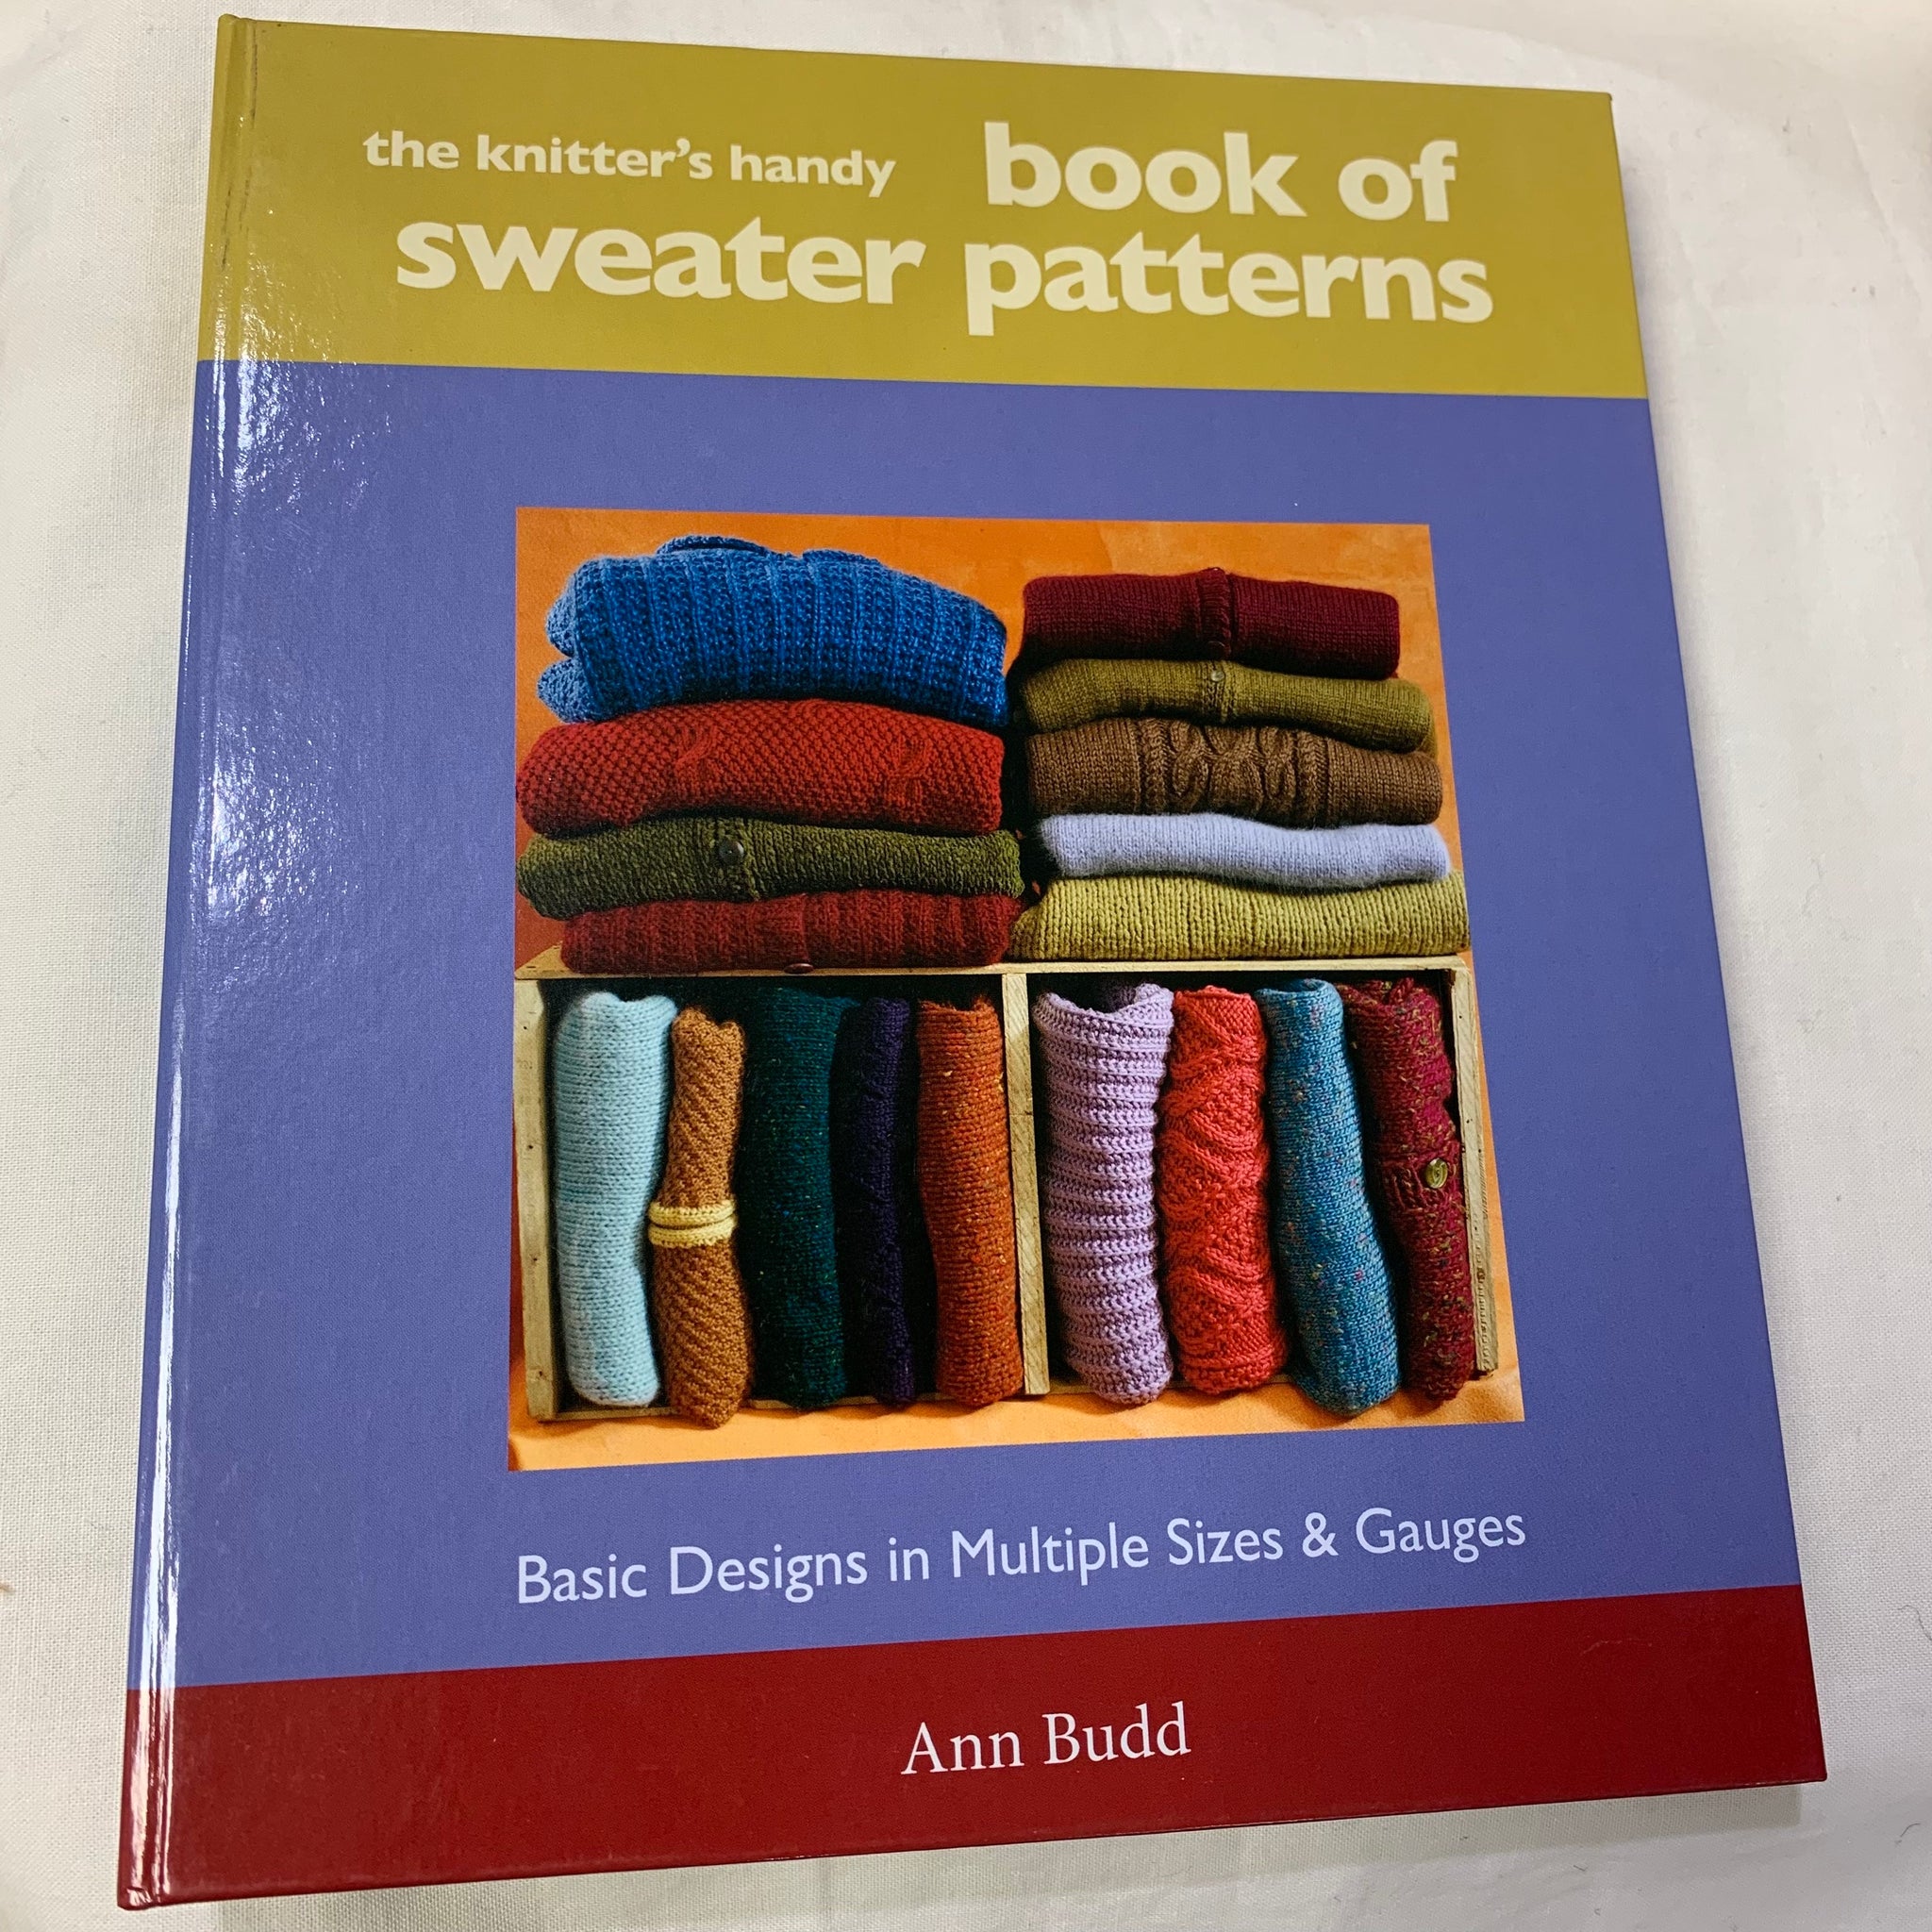 The Knitter's Handy Book of Sweater Patterns